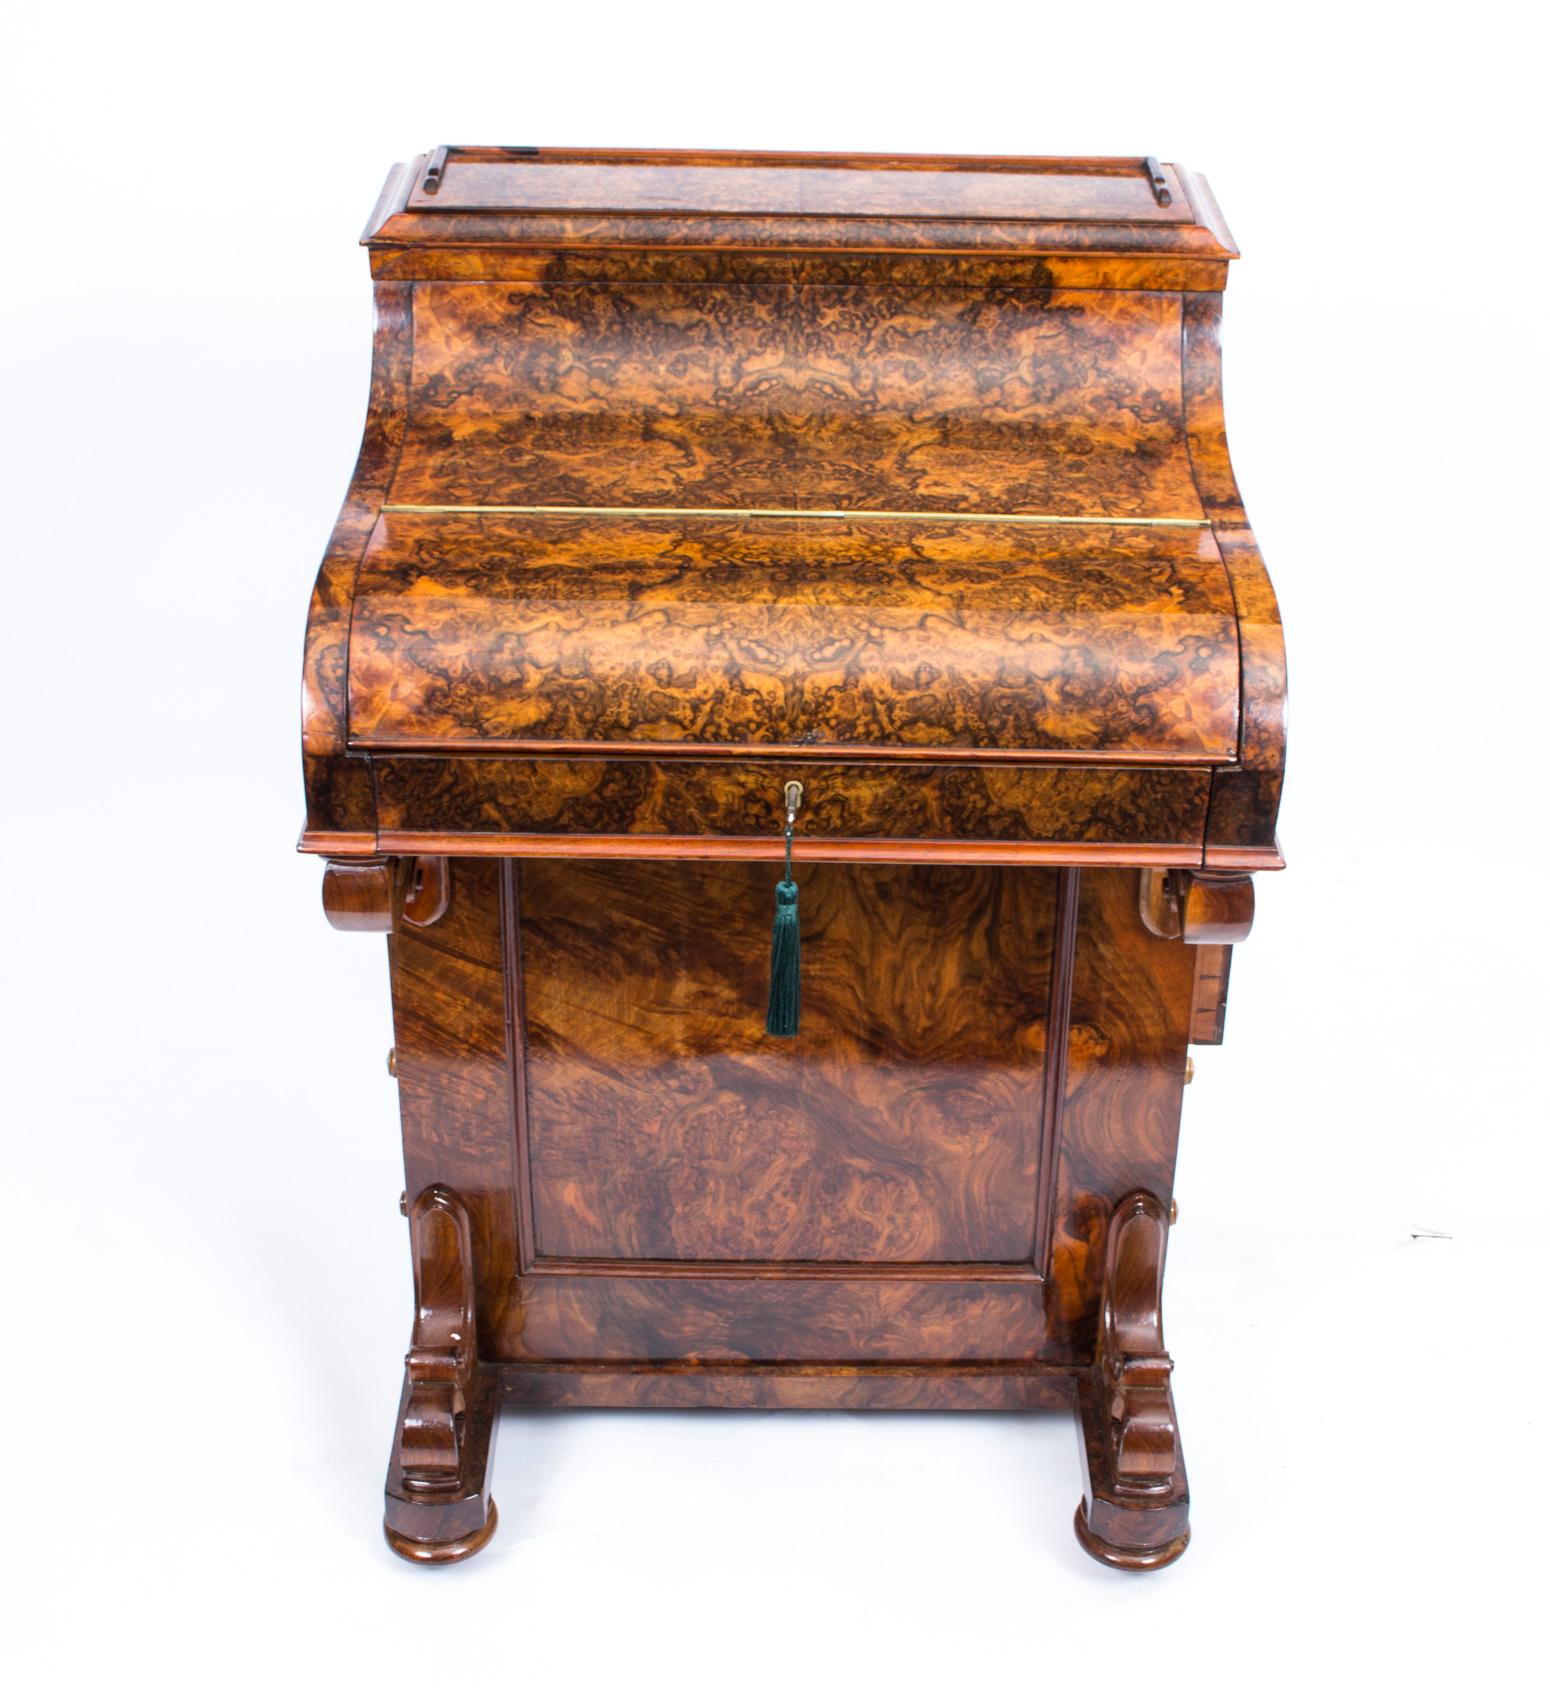 This is a gorgeous antique piano fronted Davenport desk, circa 1860 in date.

It is crafted from fabulous burr walnut and features a beautiful hinged gilt tooled green leather inset.

It has been wonderfully made by a master craftsman, the